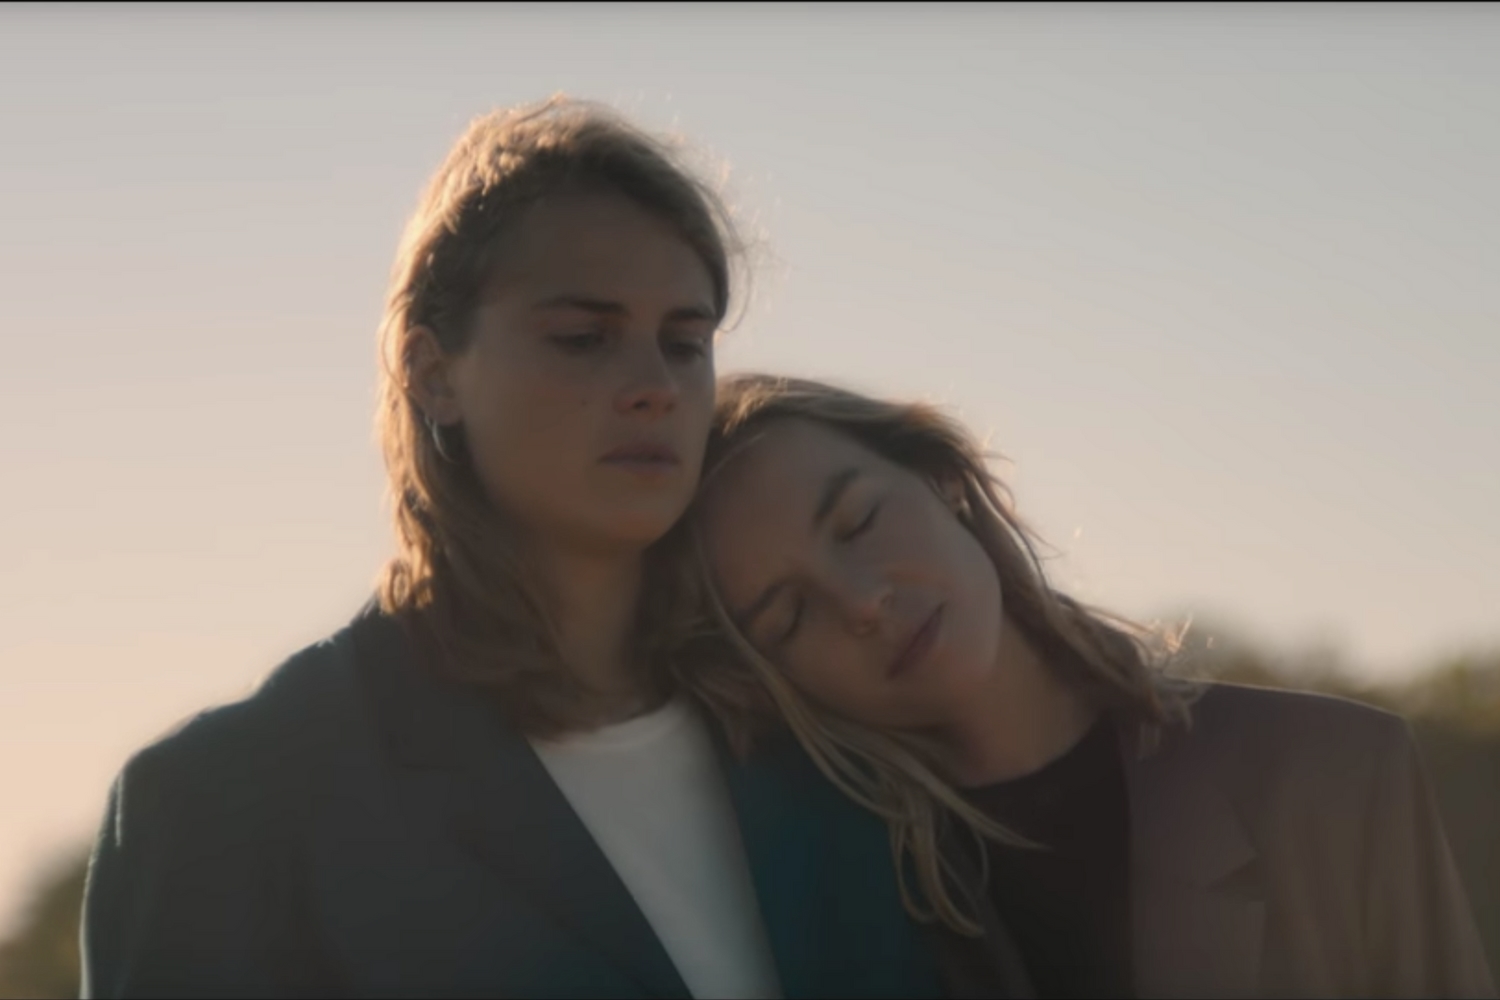 The Japanese House shares emotional ‘Lilo’ video